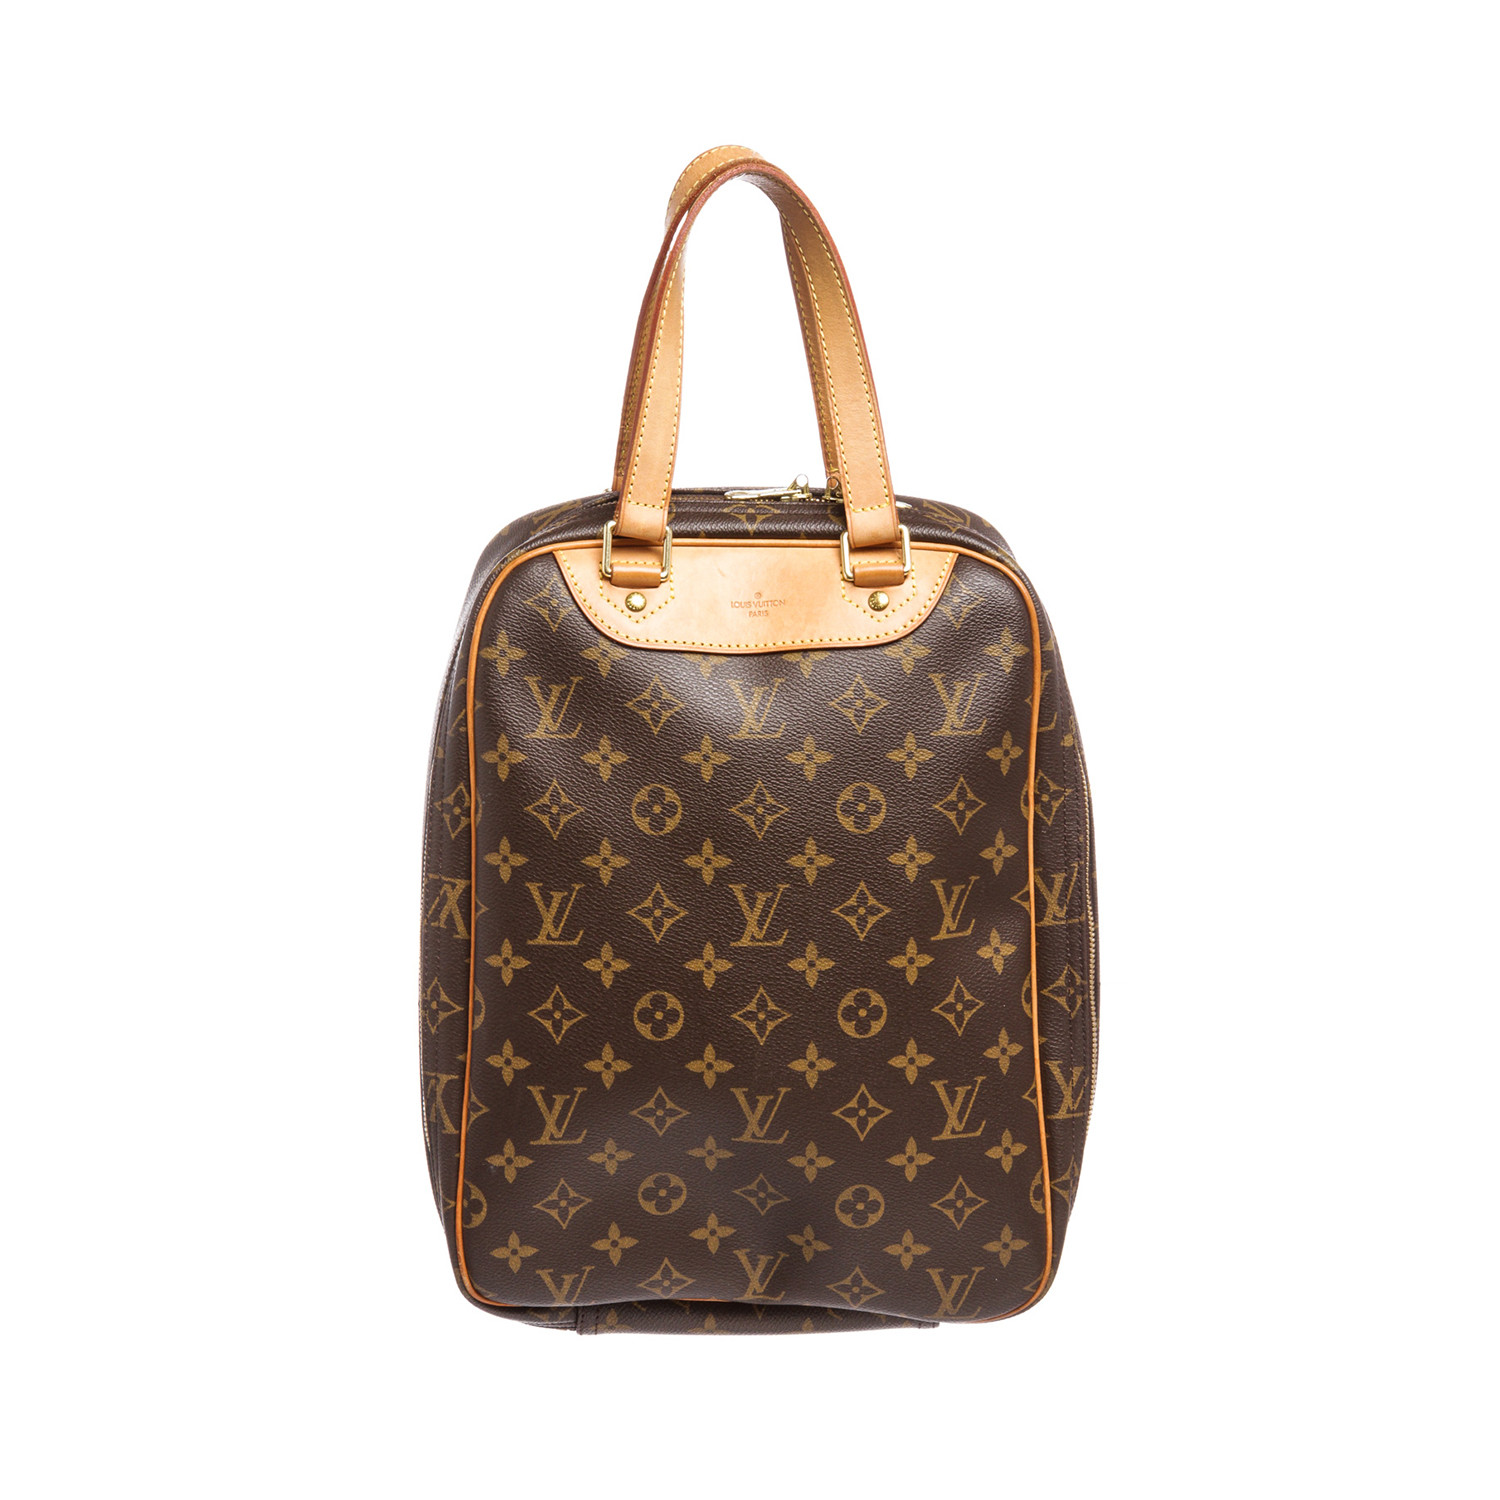 Used Louis Vuitton Bags Sale Uk | Natural Resource